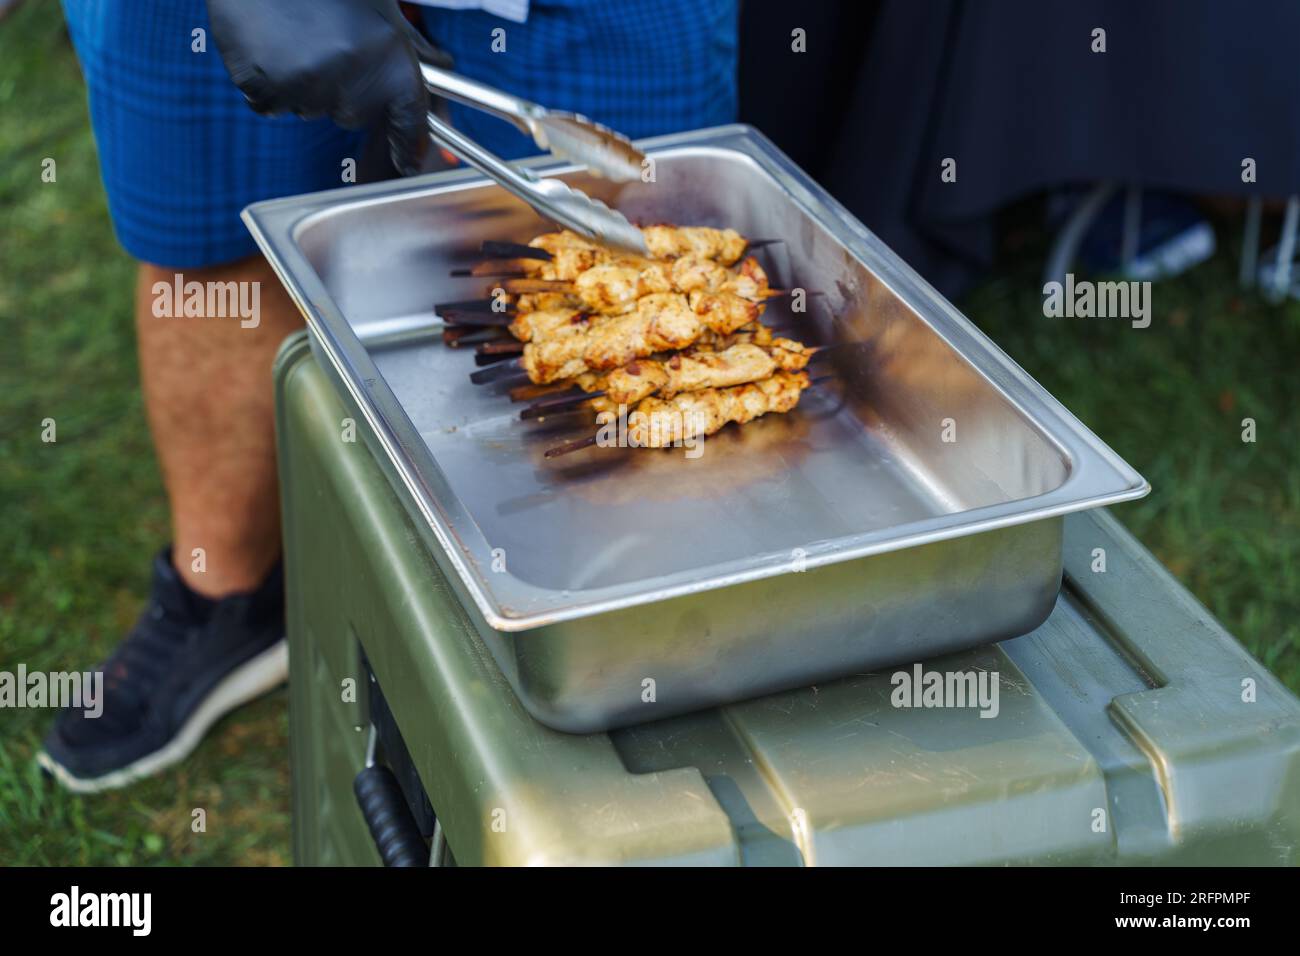 A cook chips grilled chicken kebabs on skewers into a stainless steel container during a barbecue party in the summer Stock Photo